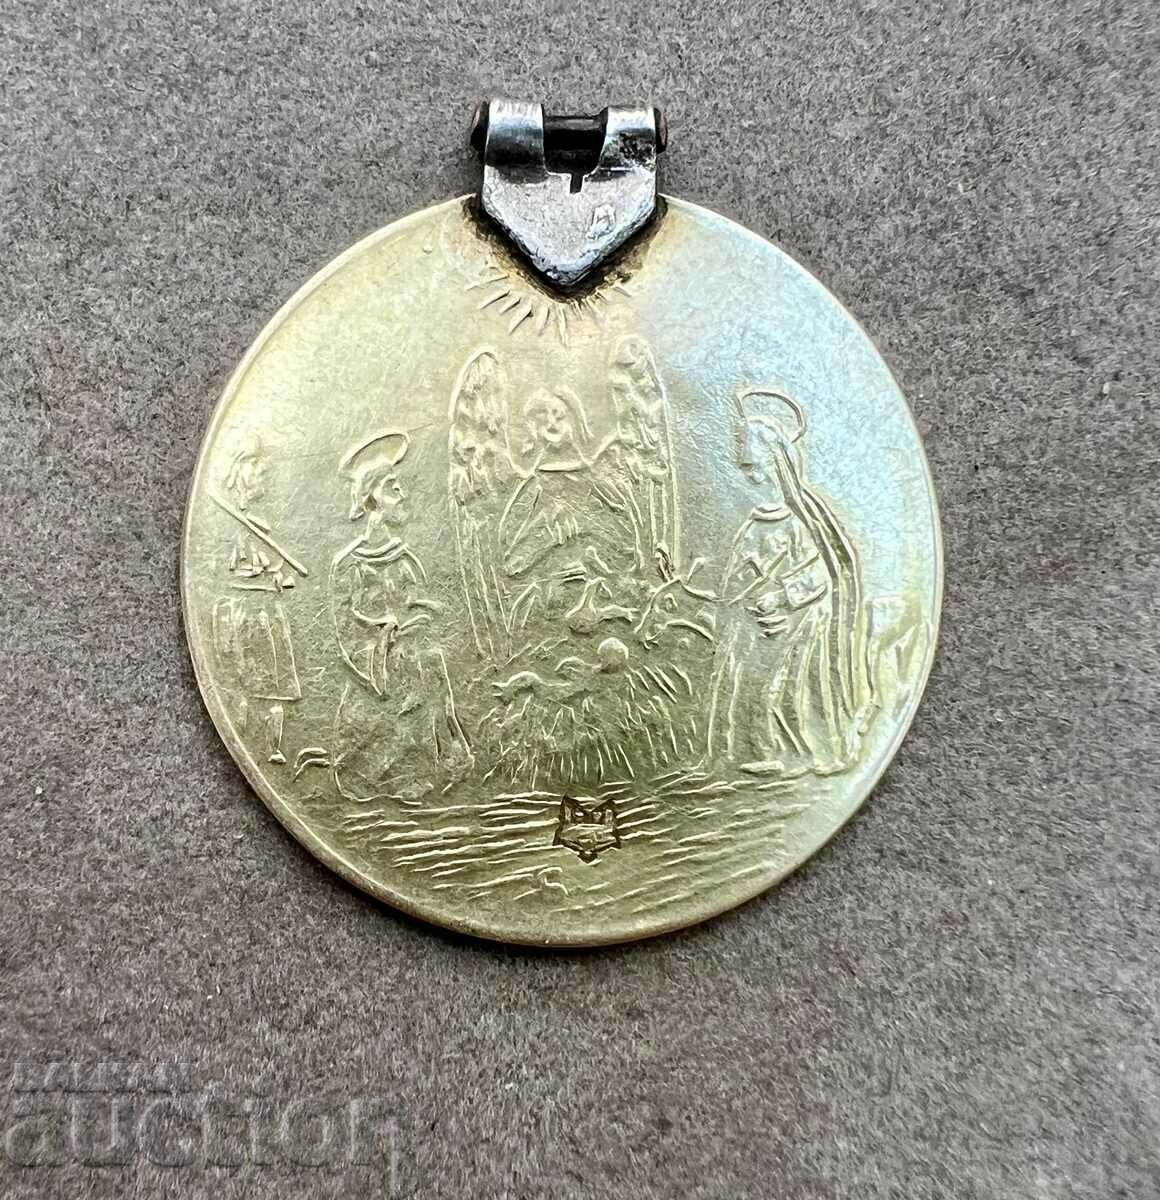 Gold authentic jewelry/ pendant for Baptism 14k